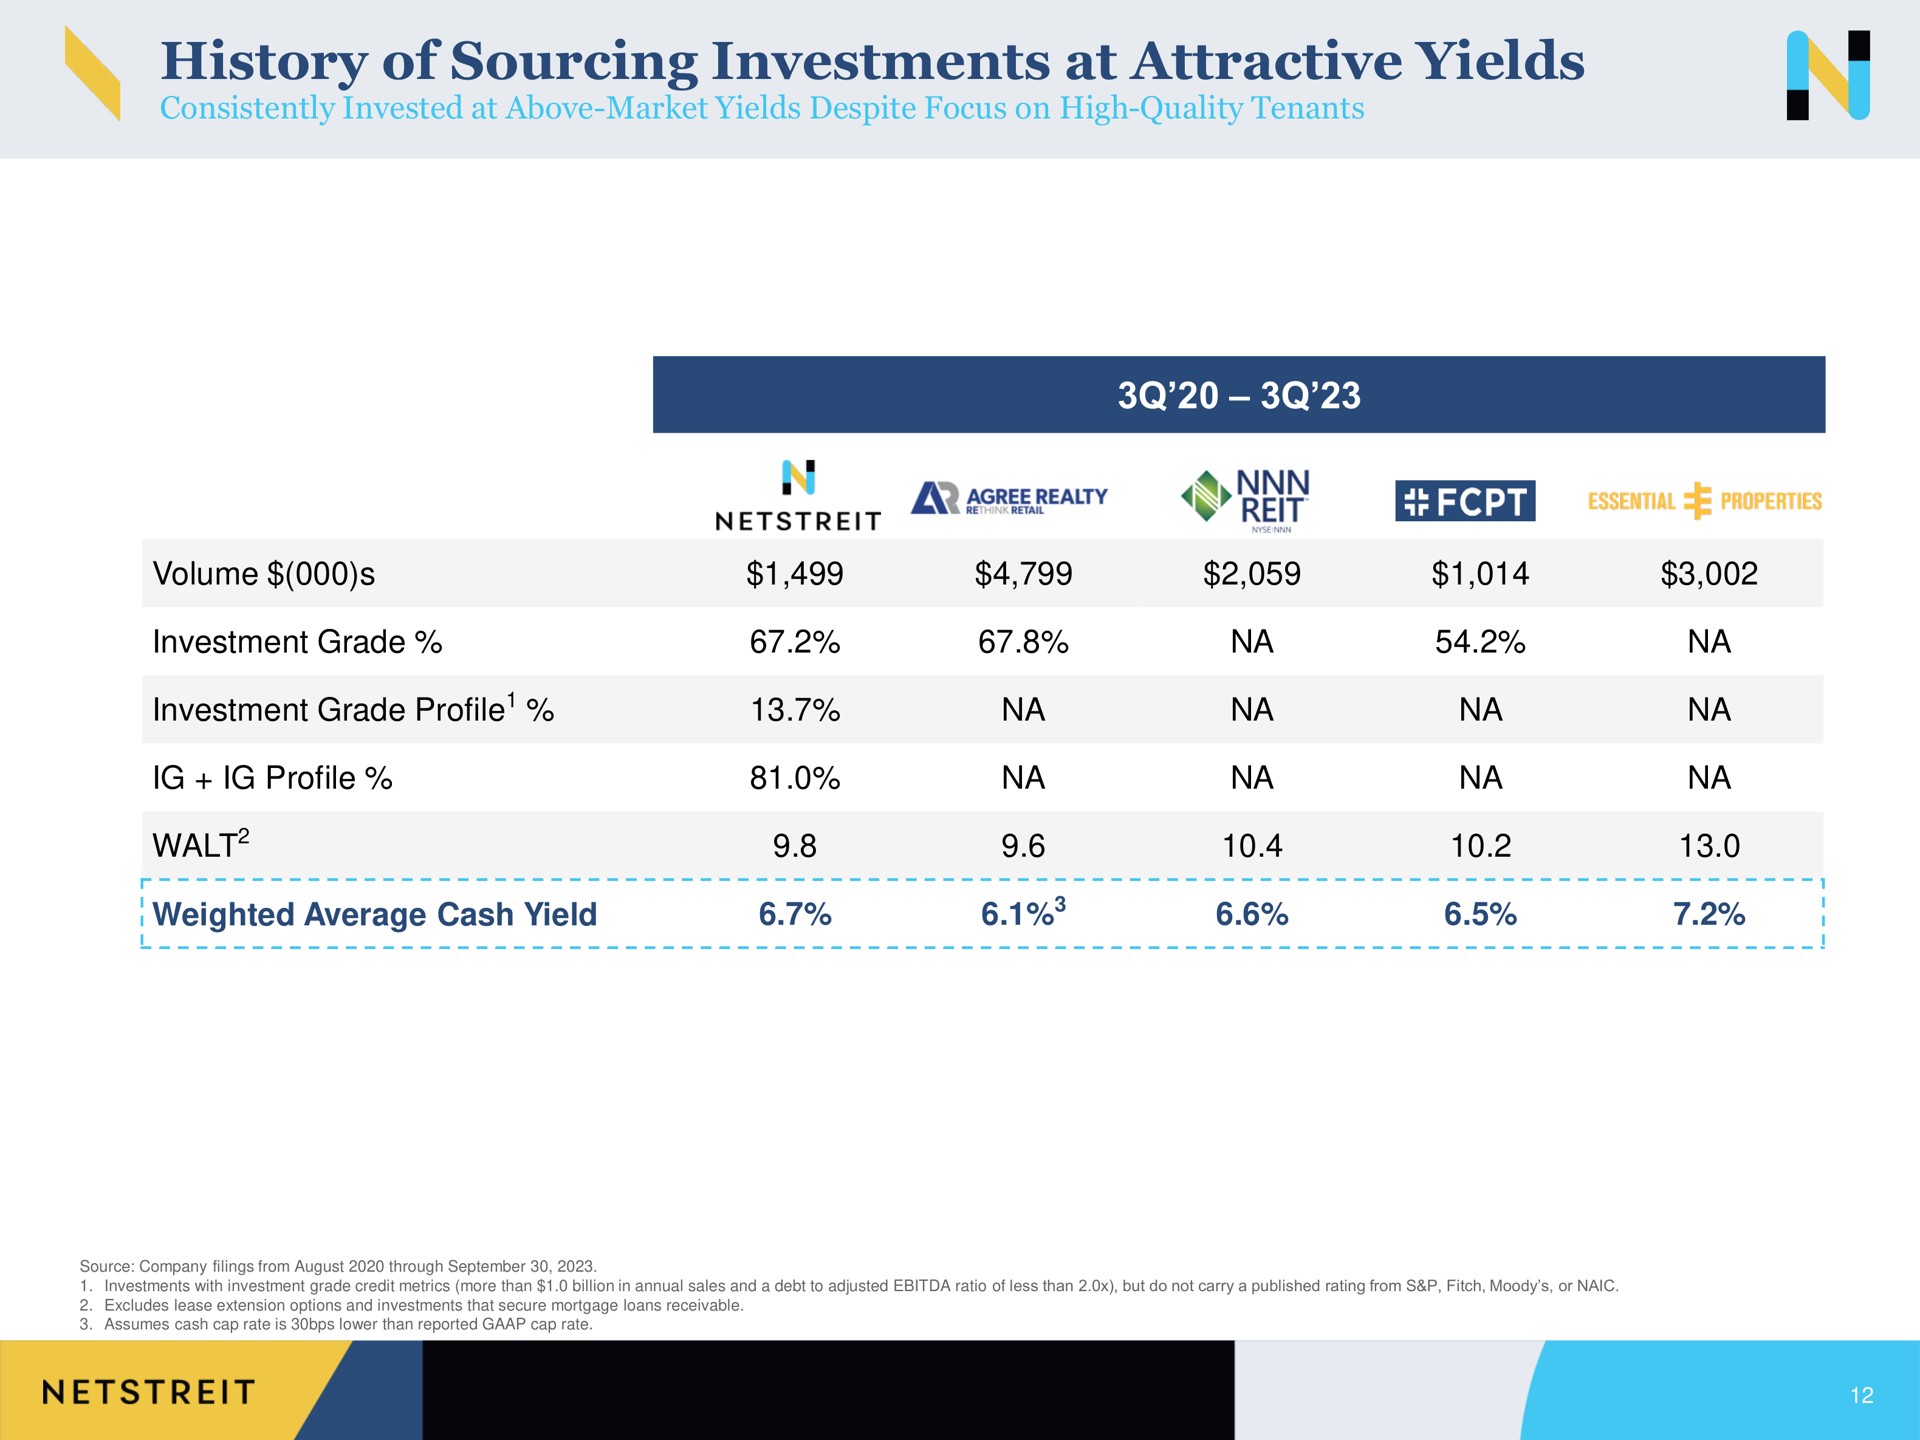 history of sourcing investments at attractive yields | Netstreit